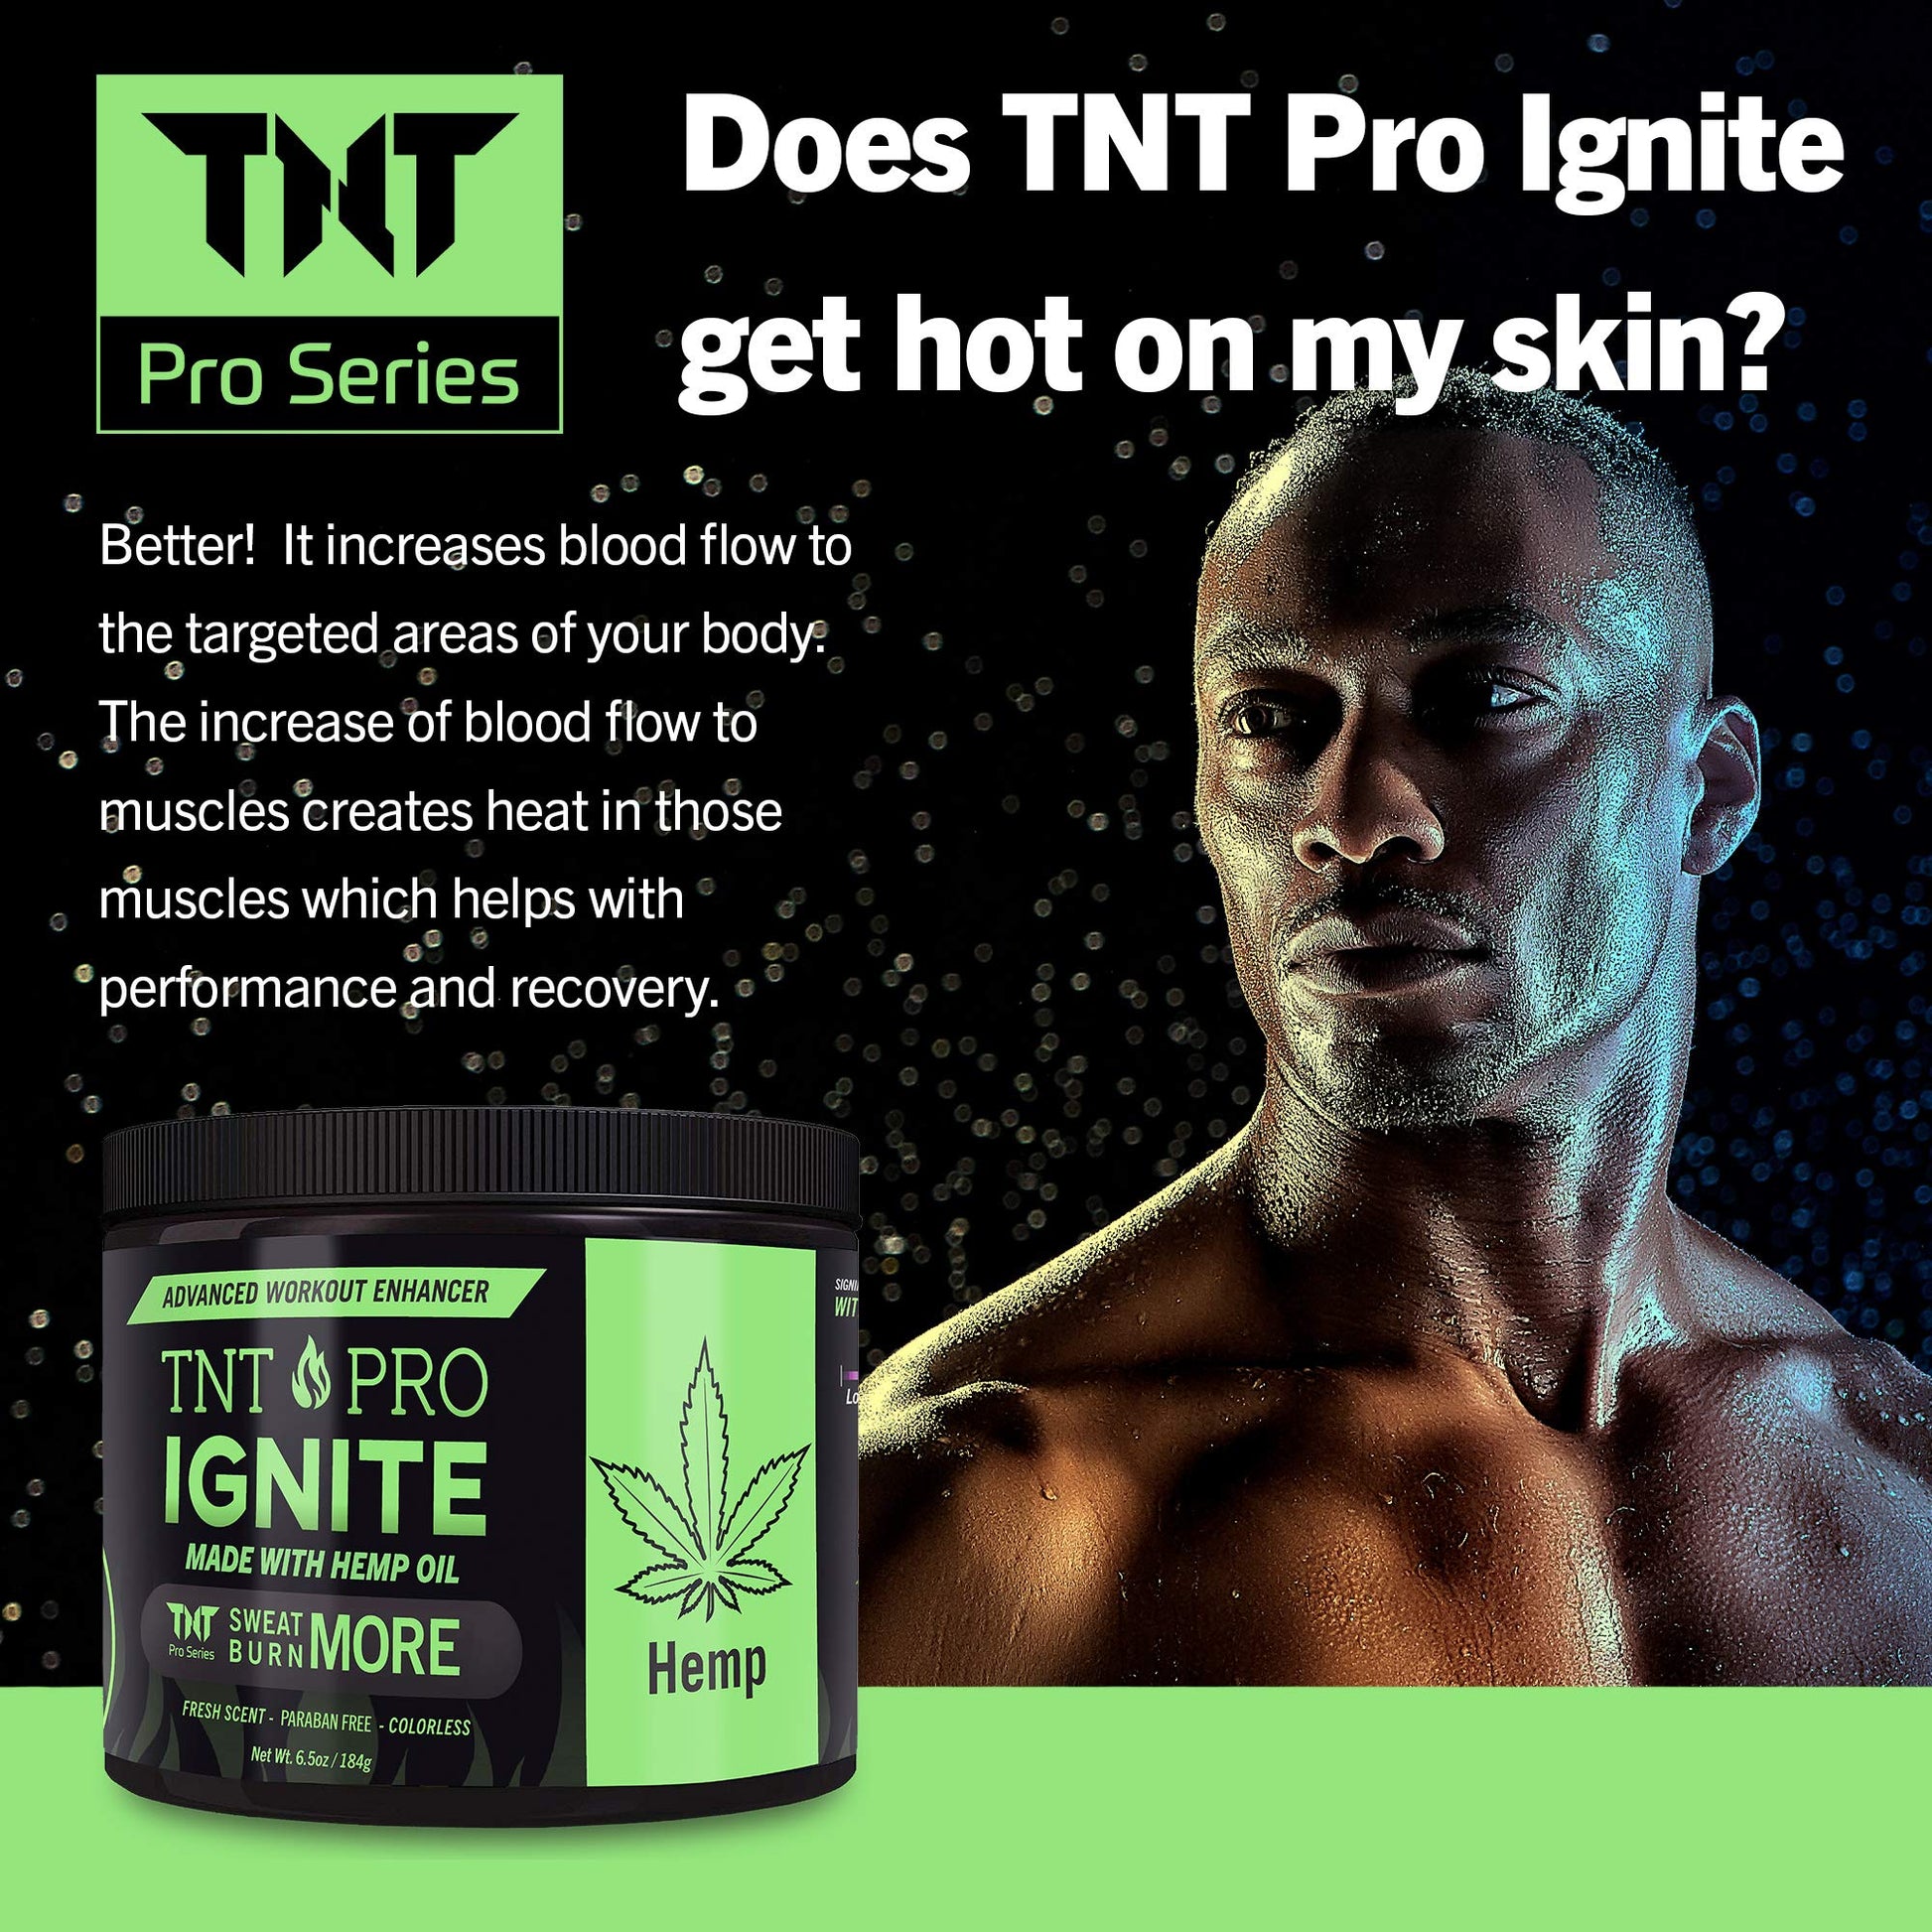 Belly Fat Burner Sweat Gel - Weight Loss Fat Burning Cream For Stomach with Hemp Pain Relief - TNT Pro Ignite Hot Cellulite Slimming Cream for Men and Women (6.5 oz Jar) - TNT Pro Series